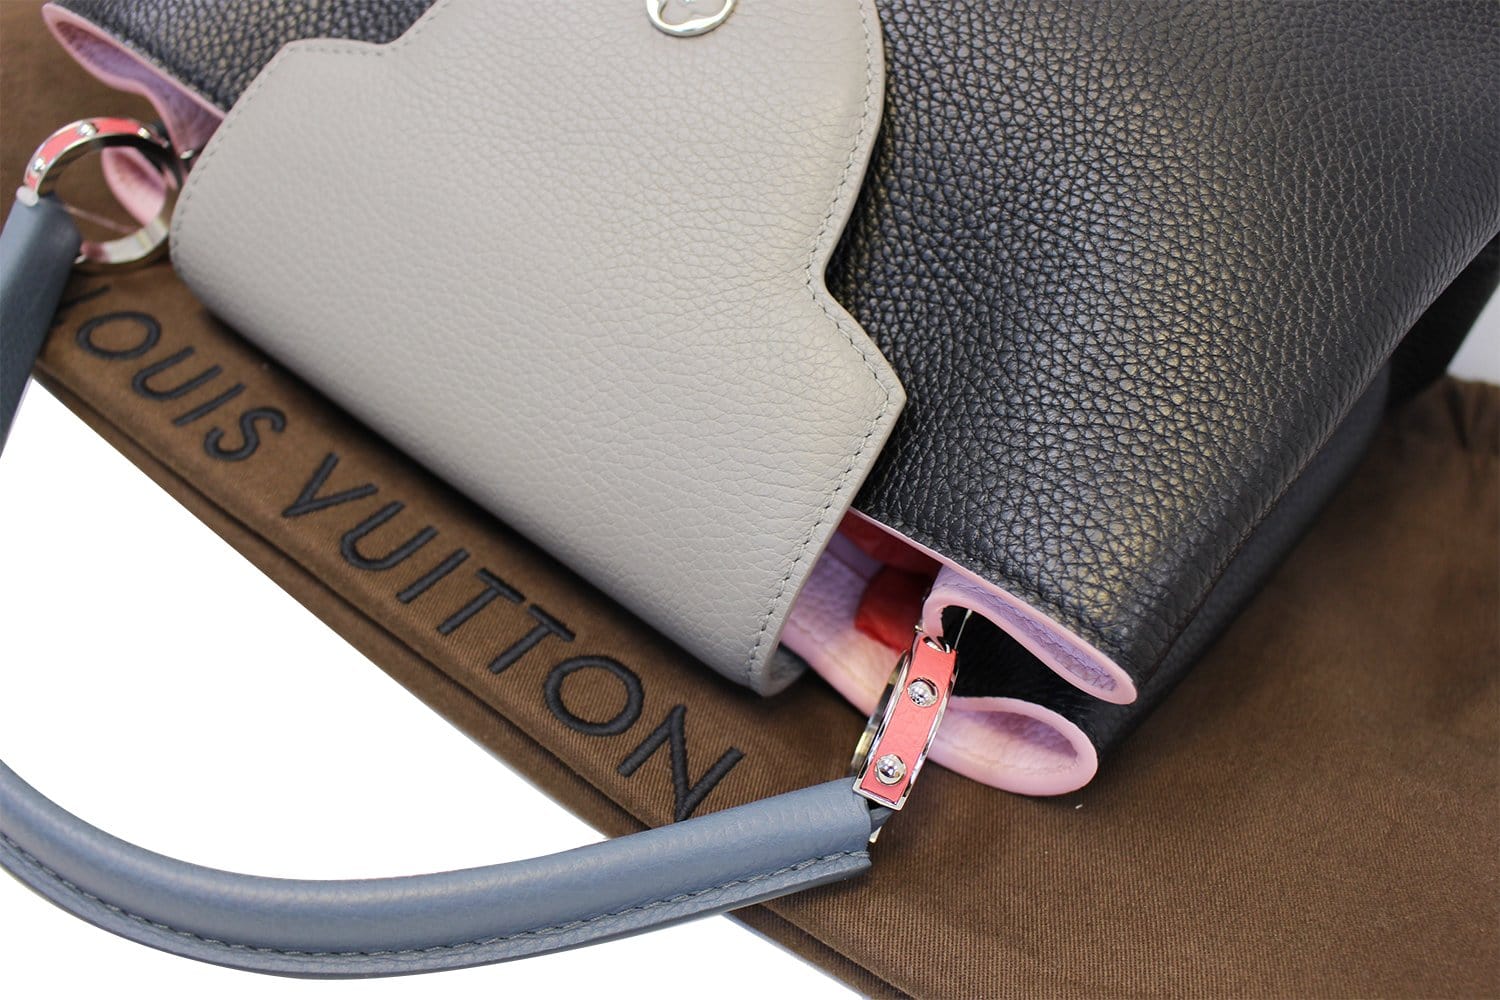 Louis Vuitton Capucines MM Bag in Black Taurillon Leather